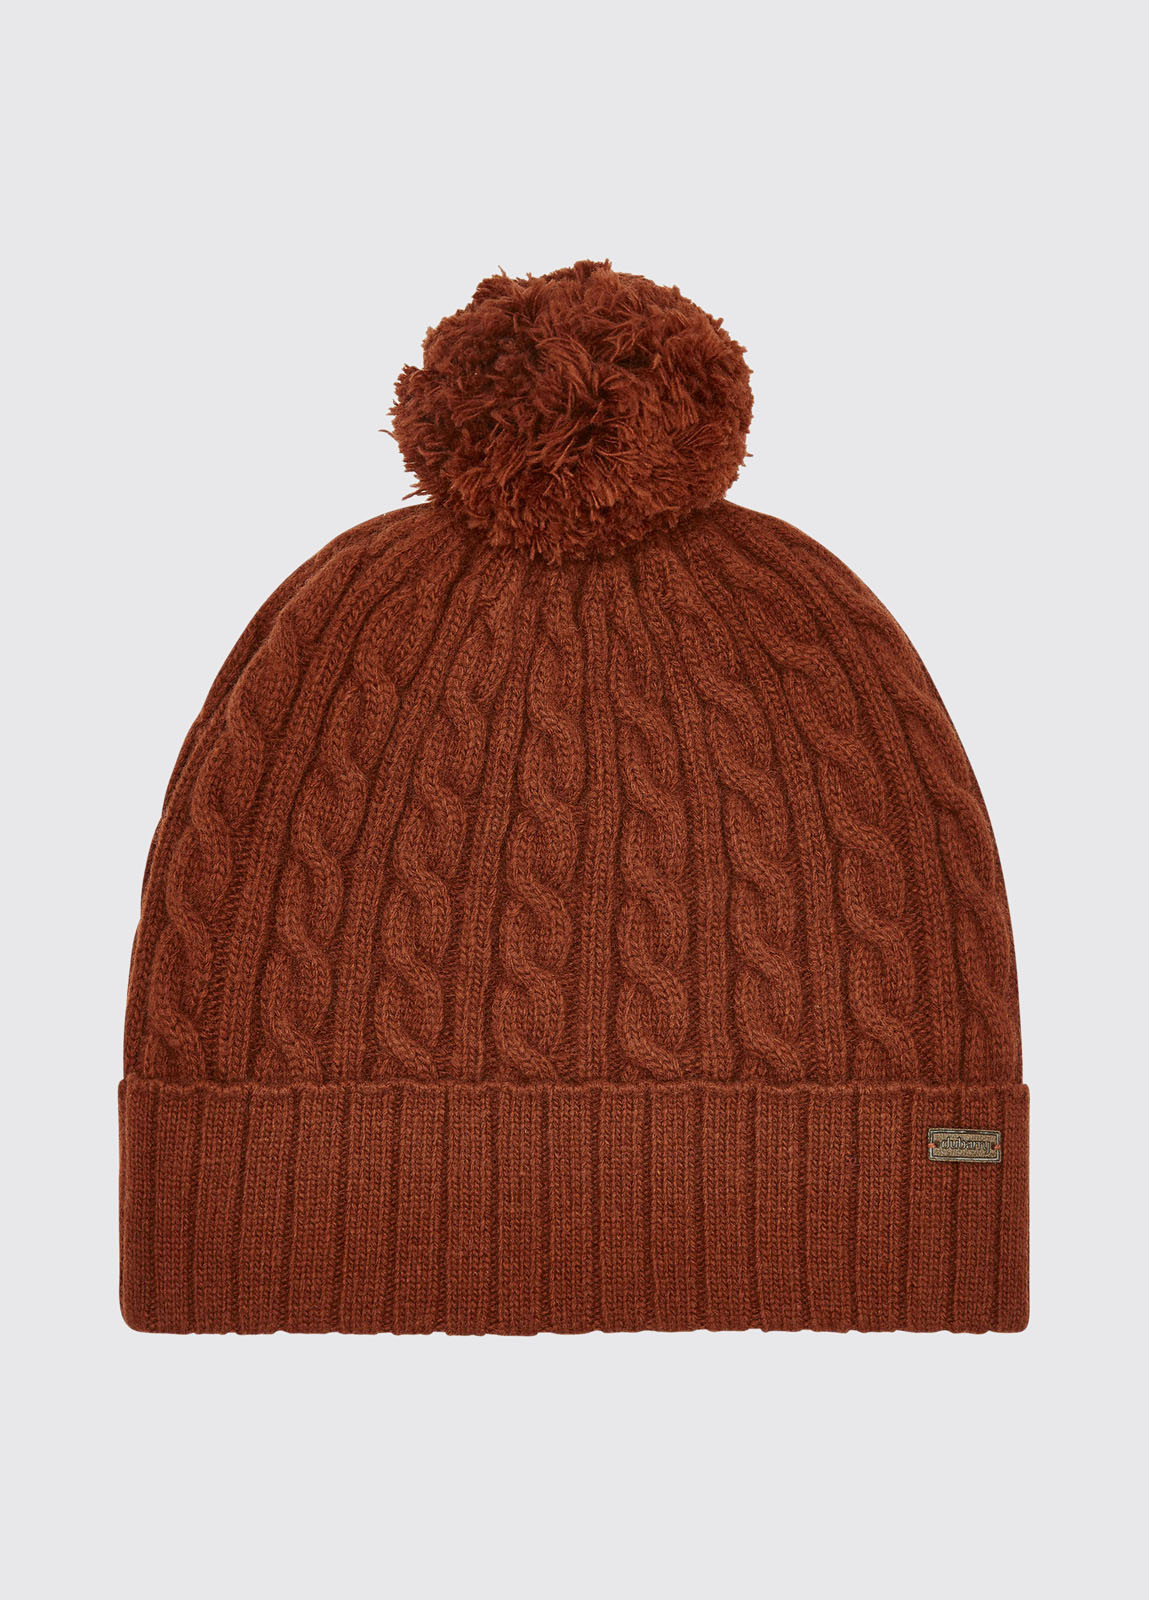 Schull Knitted Hat - Russet